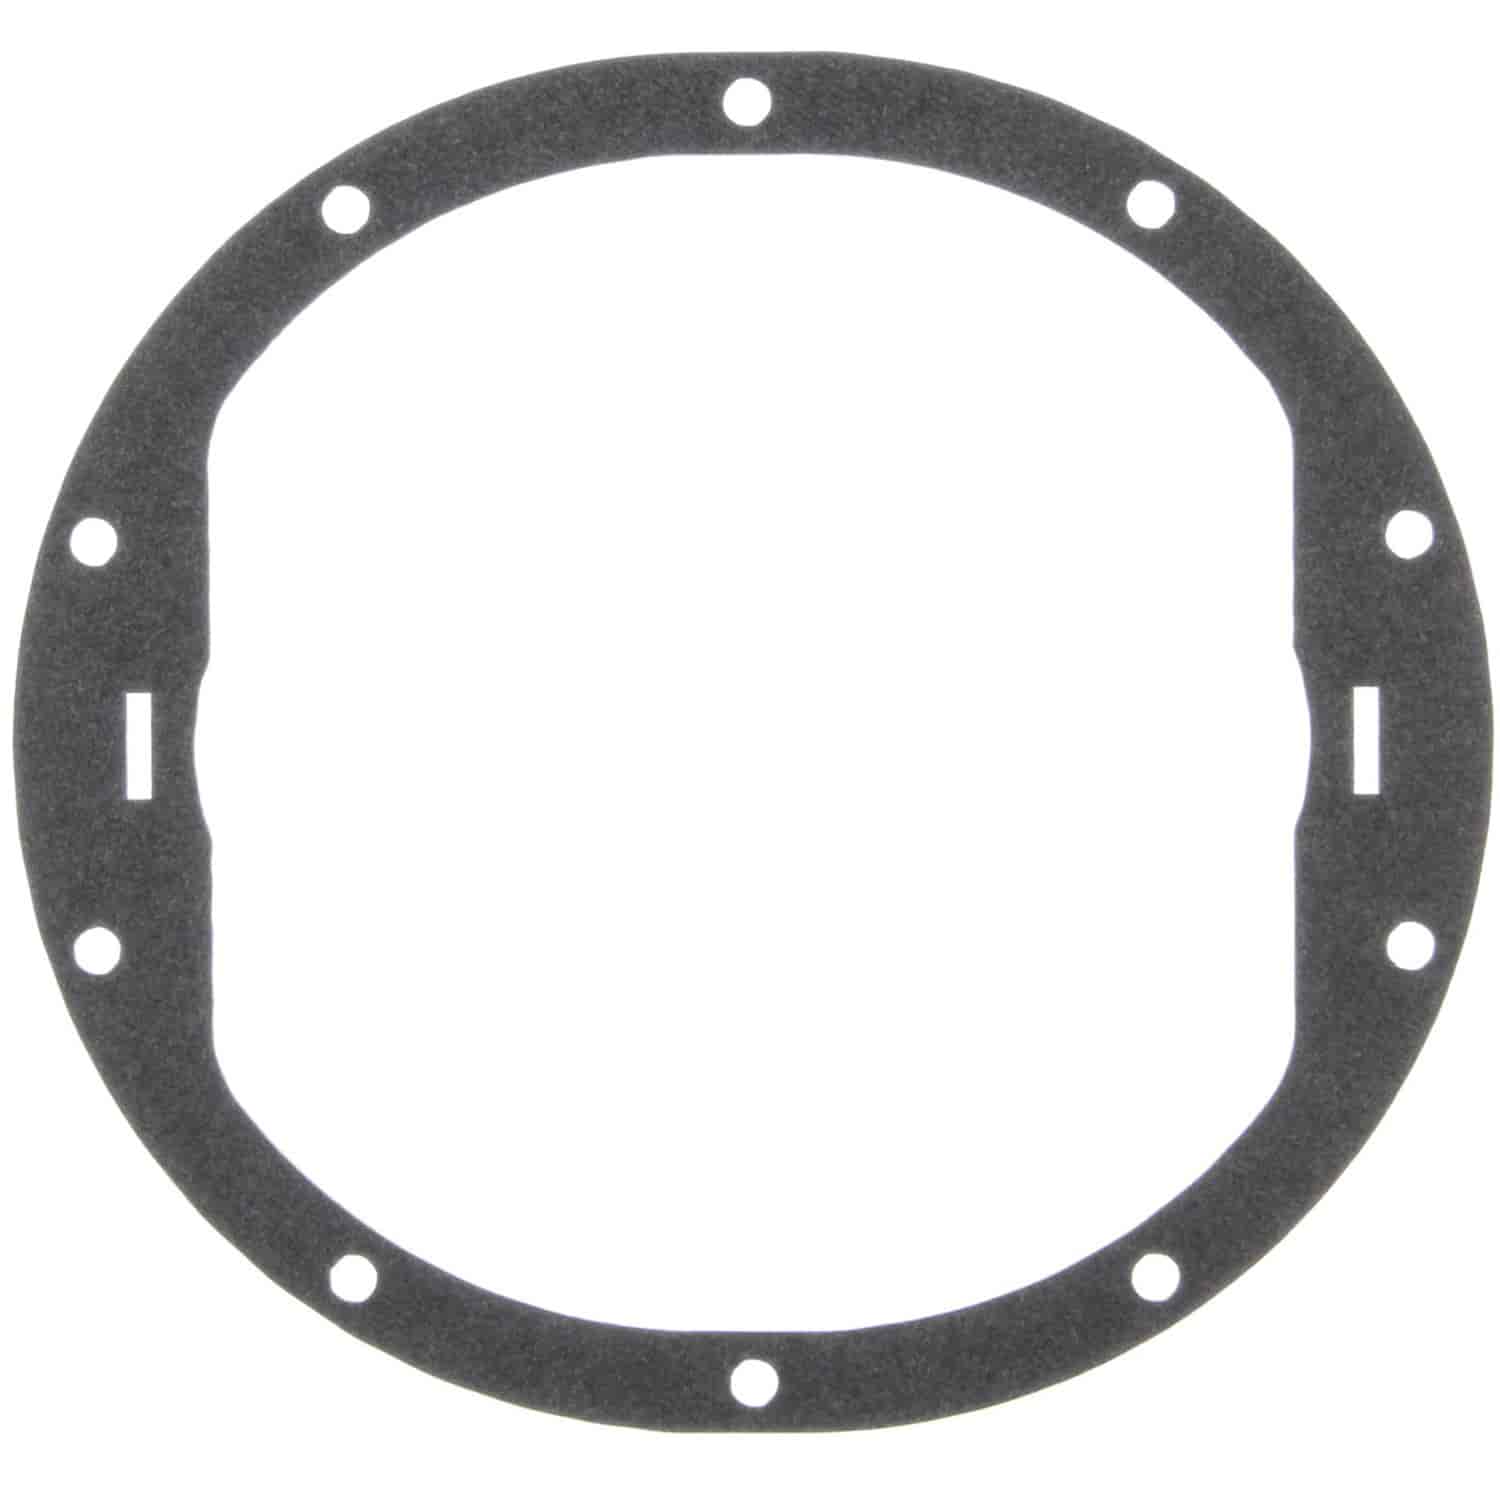 Axle Housing Cover Gasket 1971-2001 GM 10 Bolt